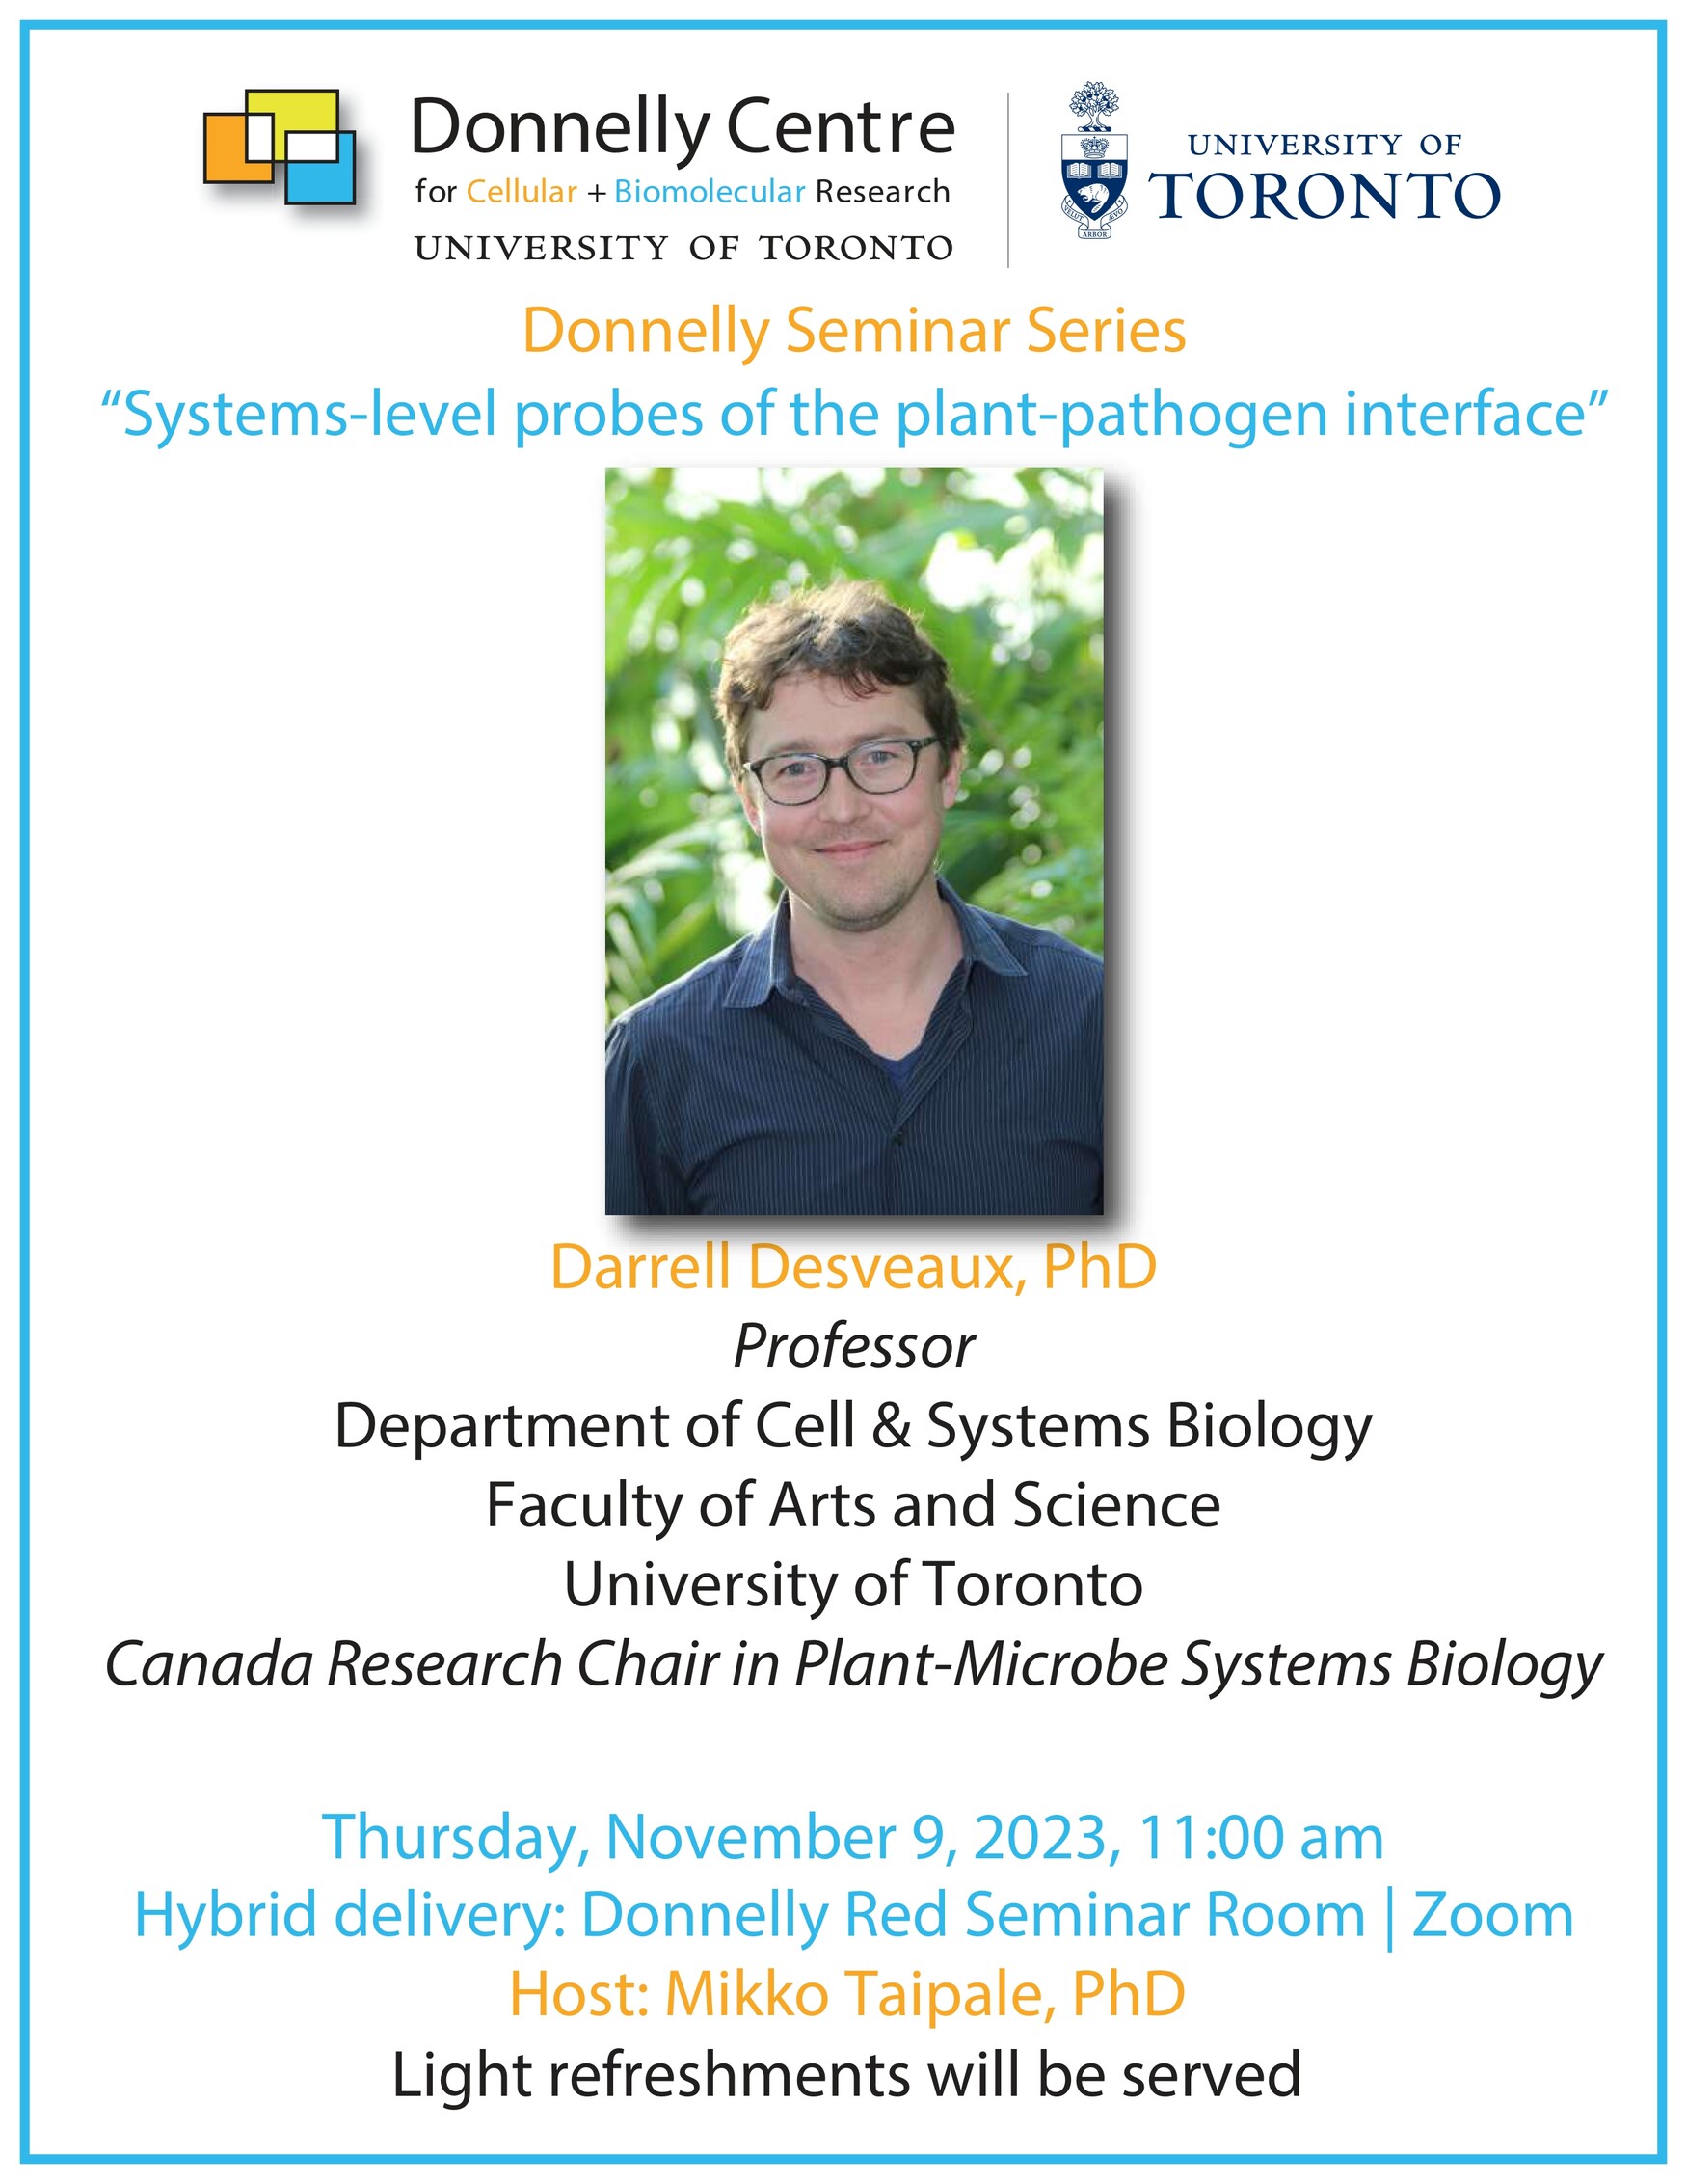 Poster for Donnelly Centre Seminar on "Systems-level probes of the plant-pathogen interface"